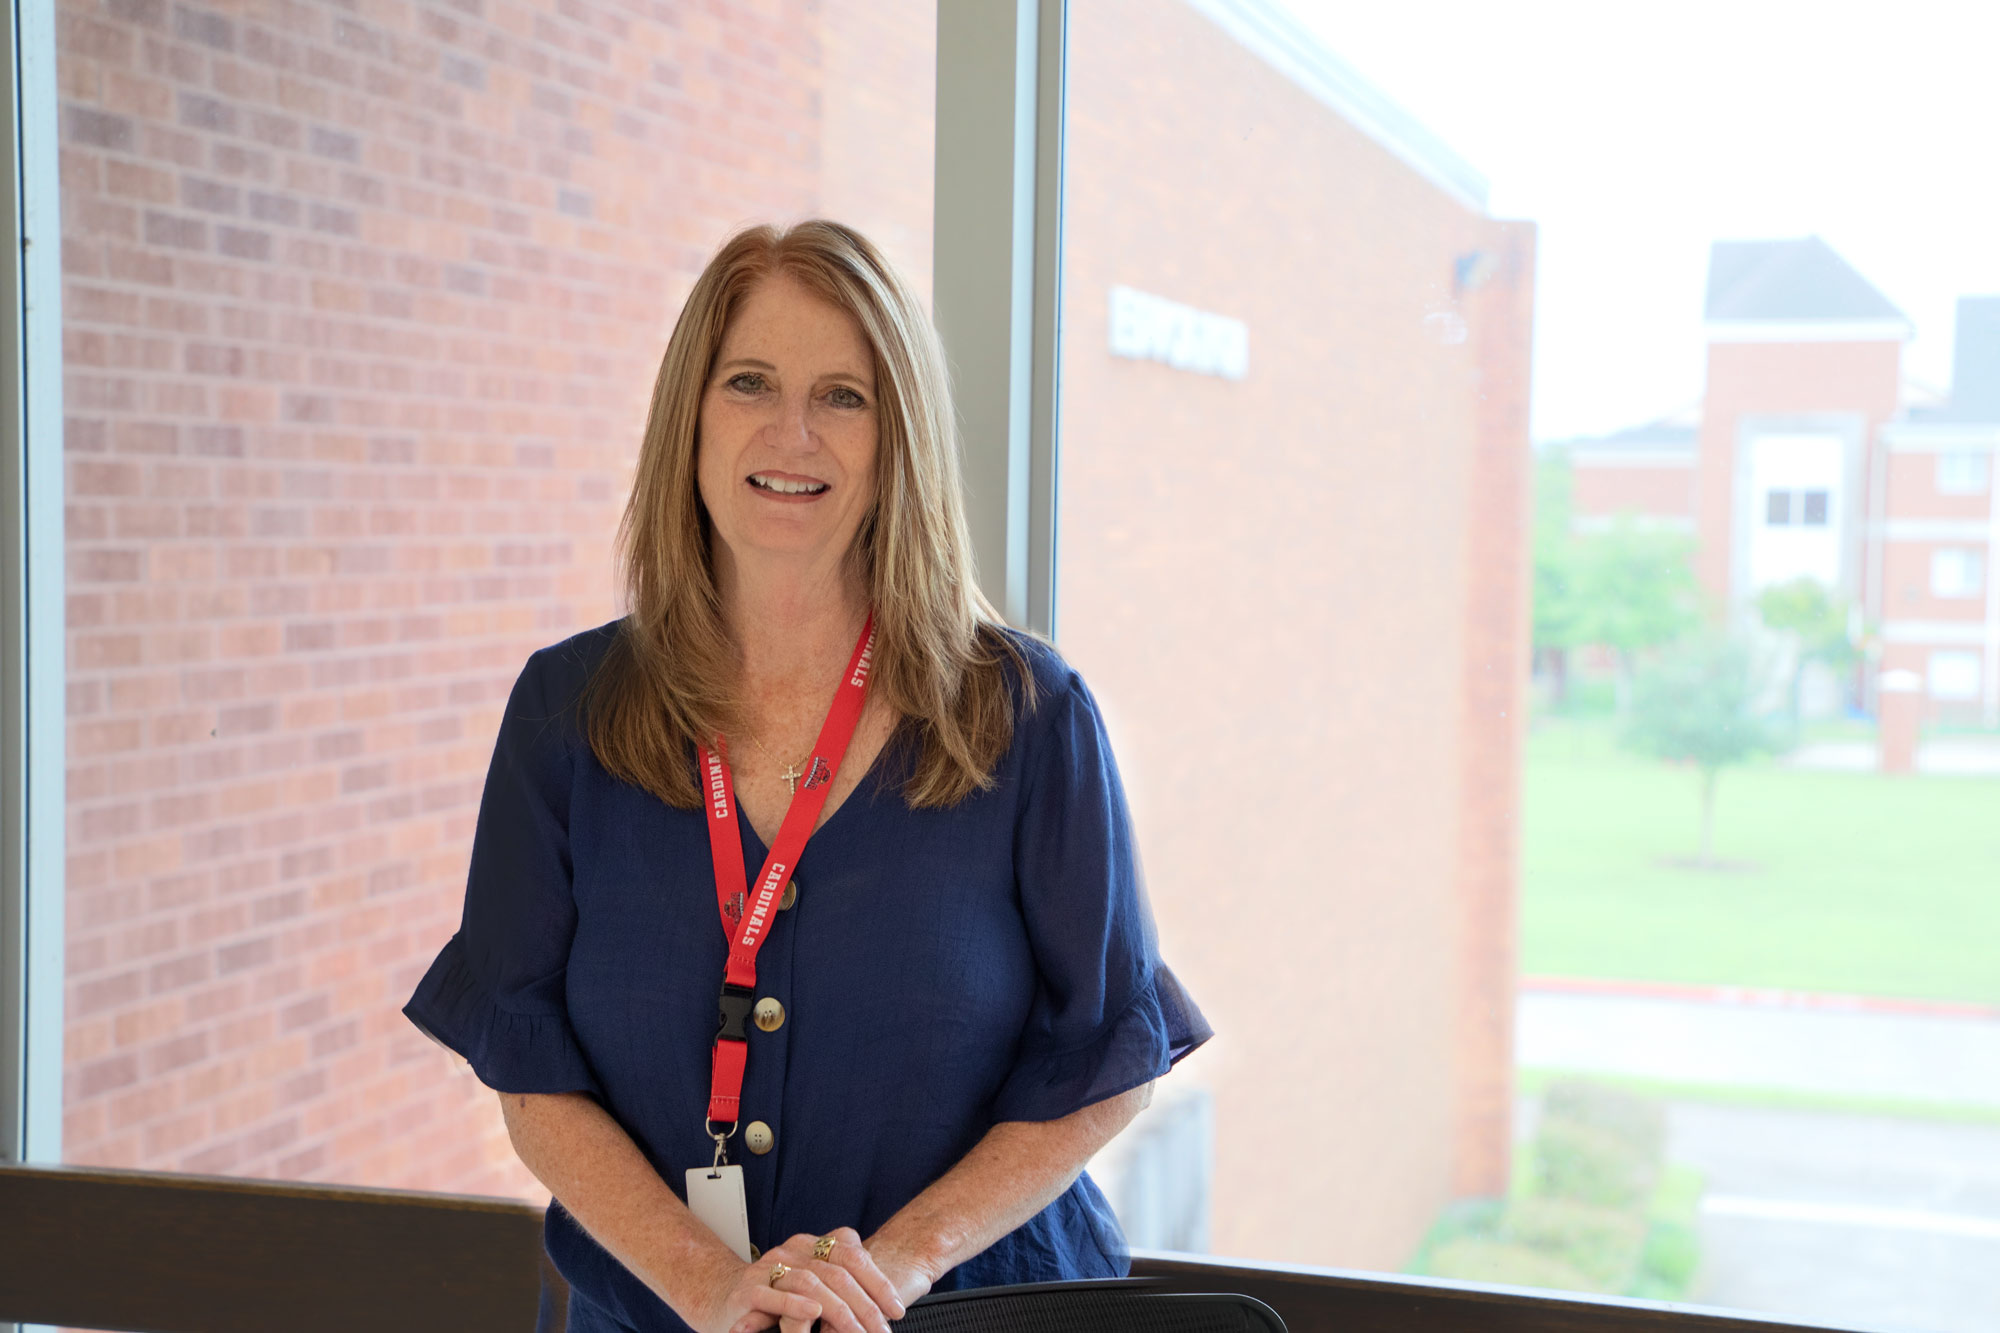 Lamar University’s College of Education and Human Development Welcomes Jody Slaughter to the Team